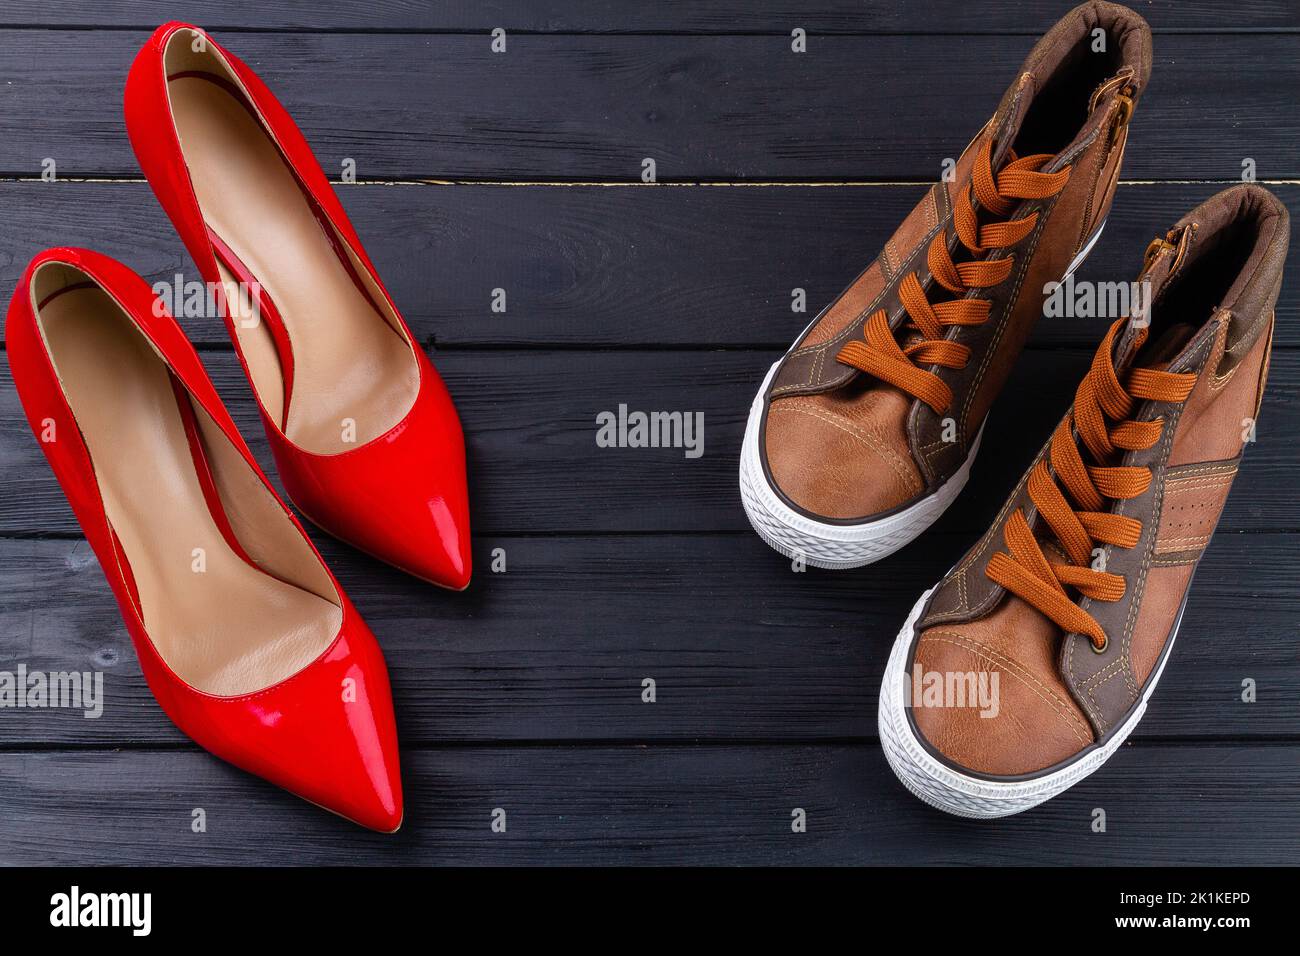 Red female high heel shoes and brown male sneakers. Top view mens and womens shoes on dark wooden background. Stock Photo